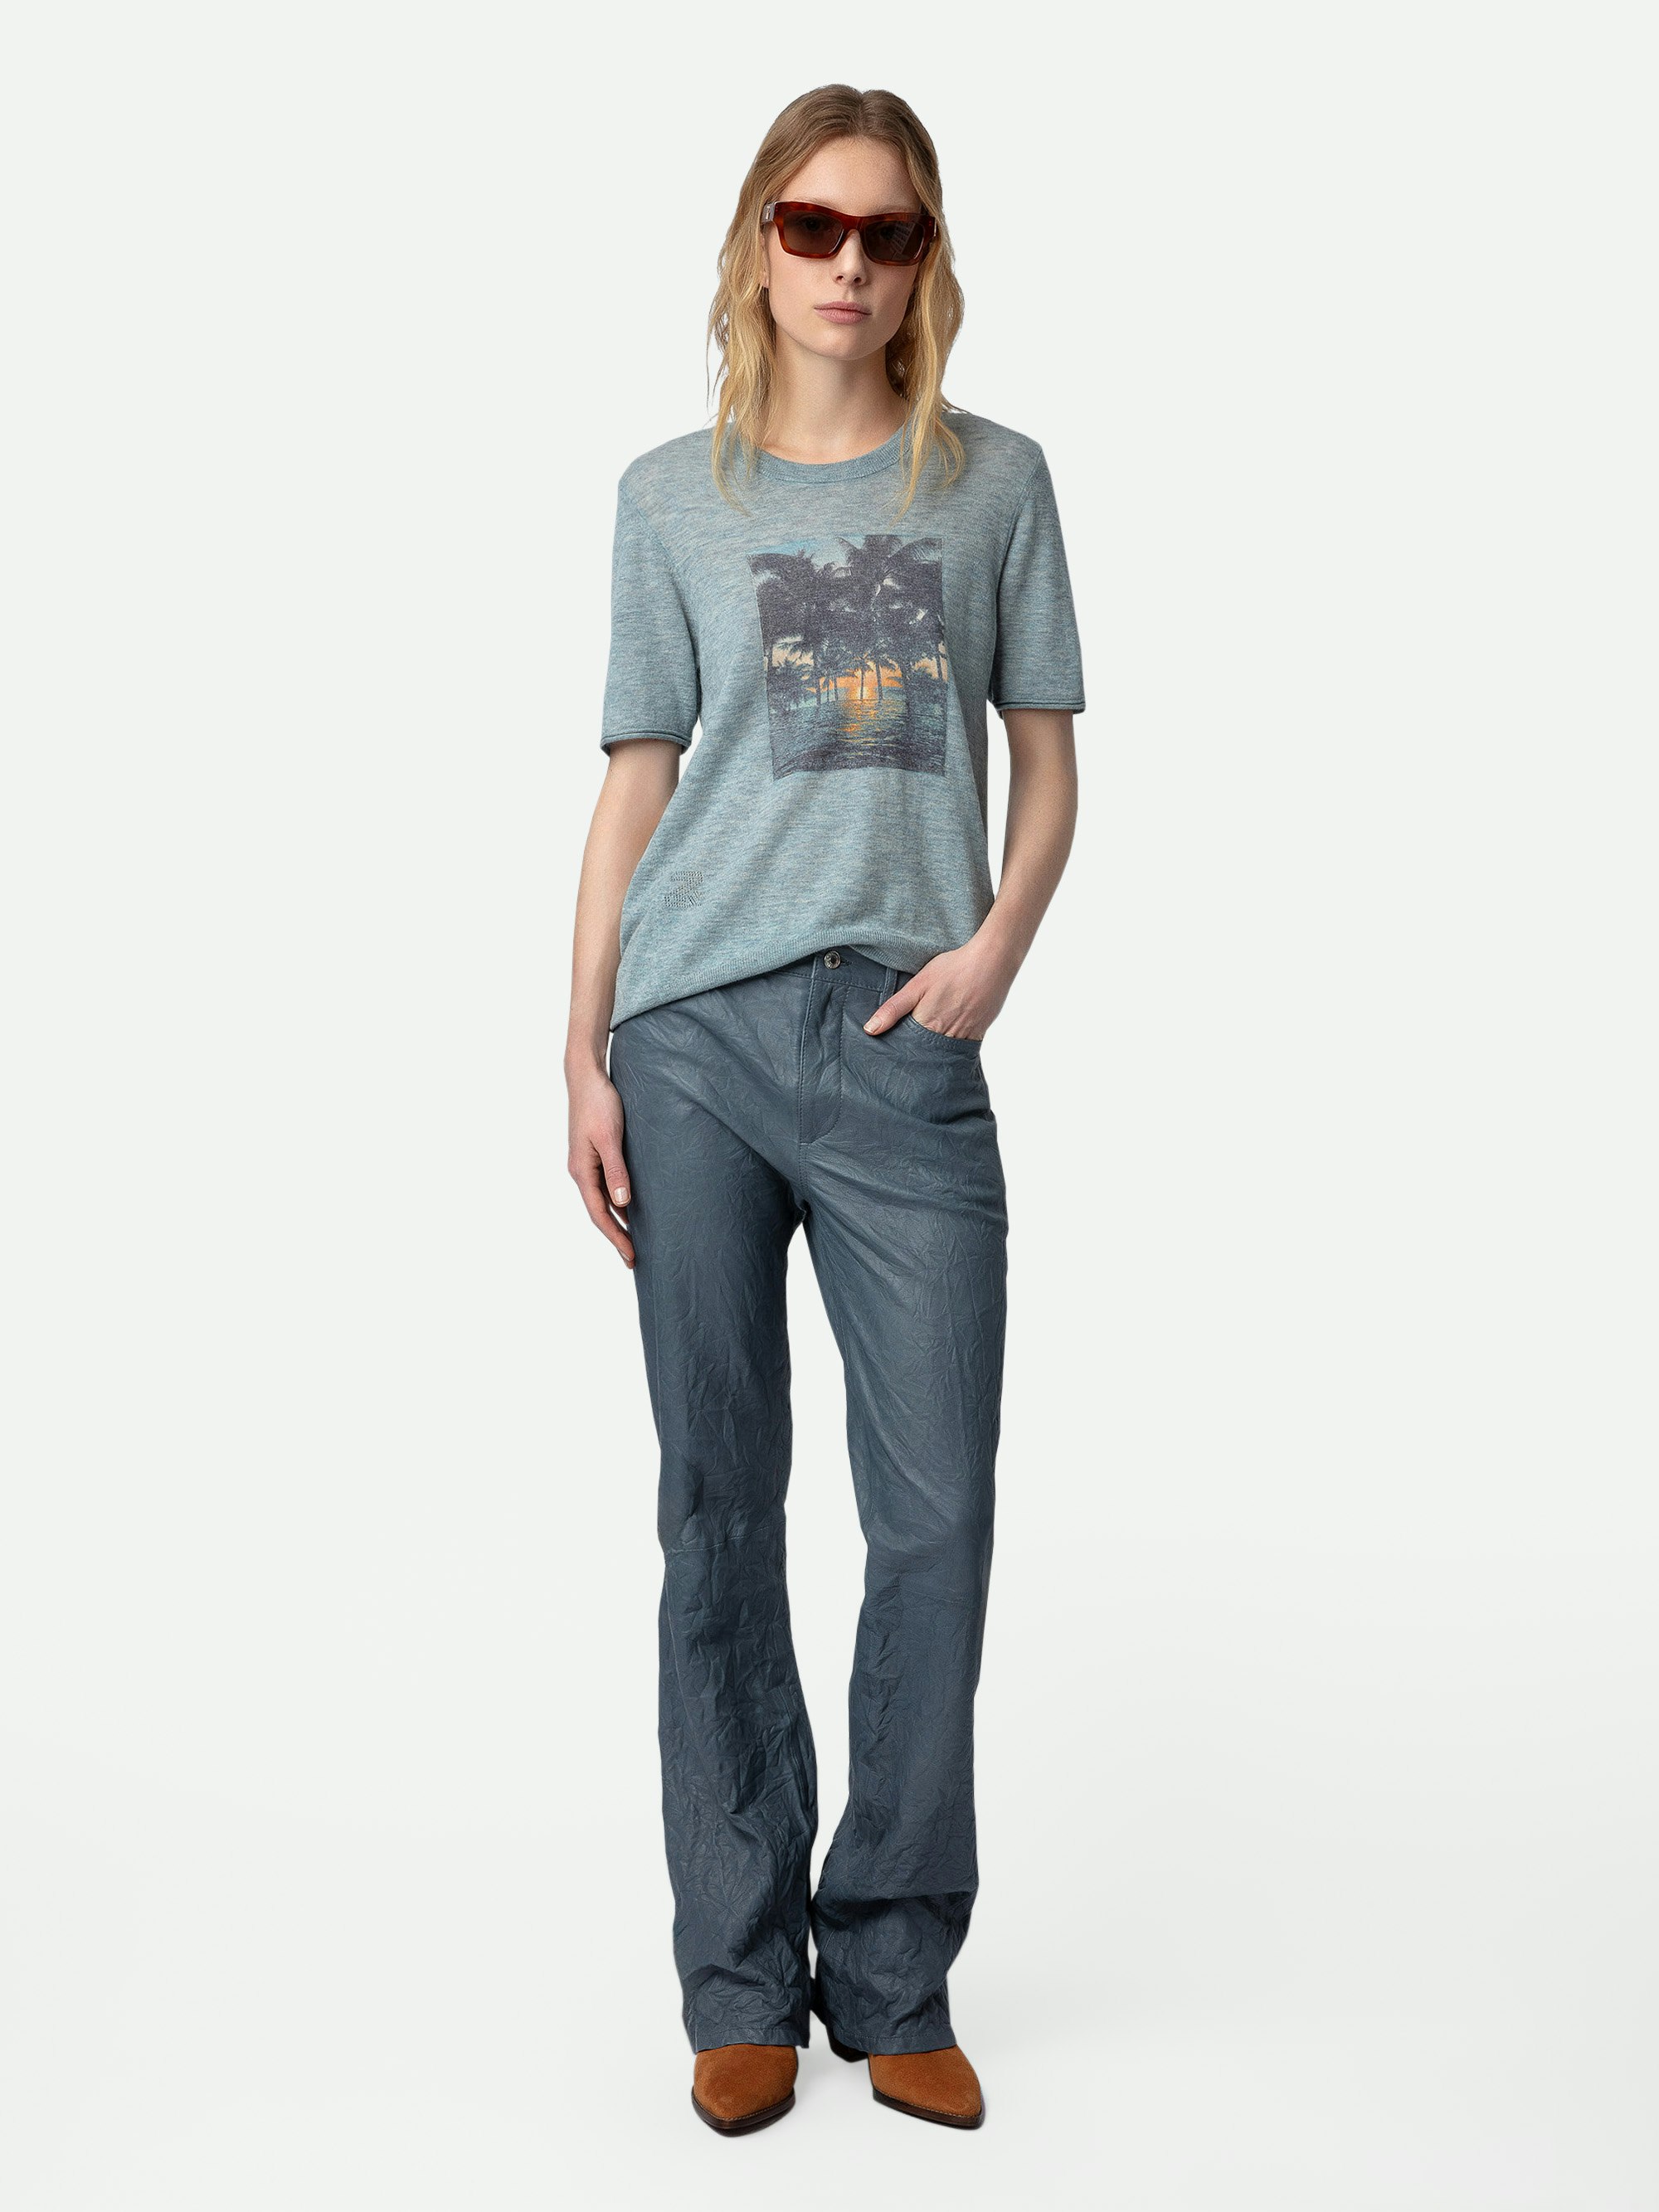 Ida Photoprint Cashmere Sweater - Sky blue feather cashmere sweater with short sleeves and Palmier photoprint.